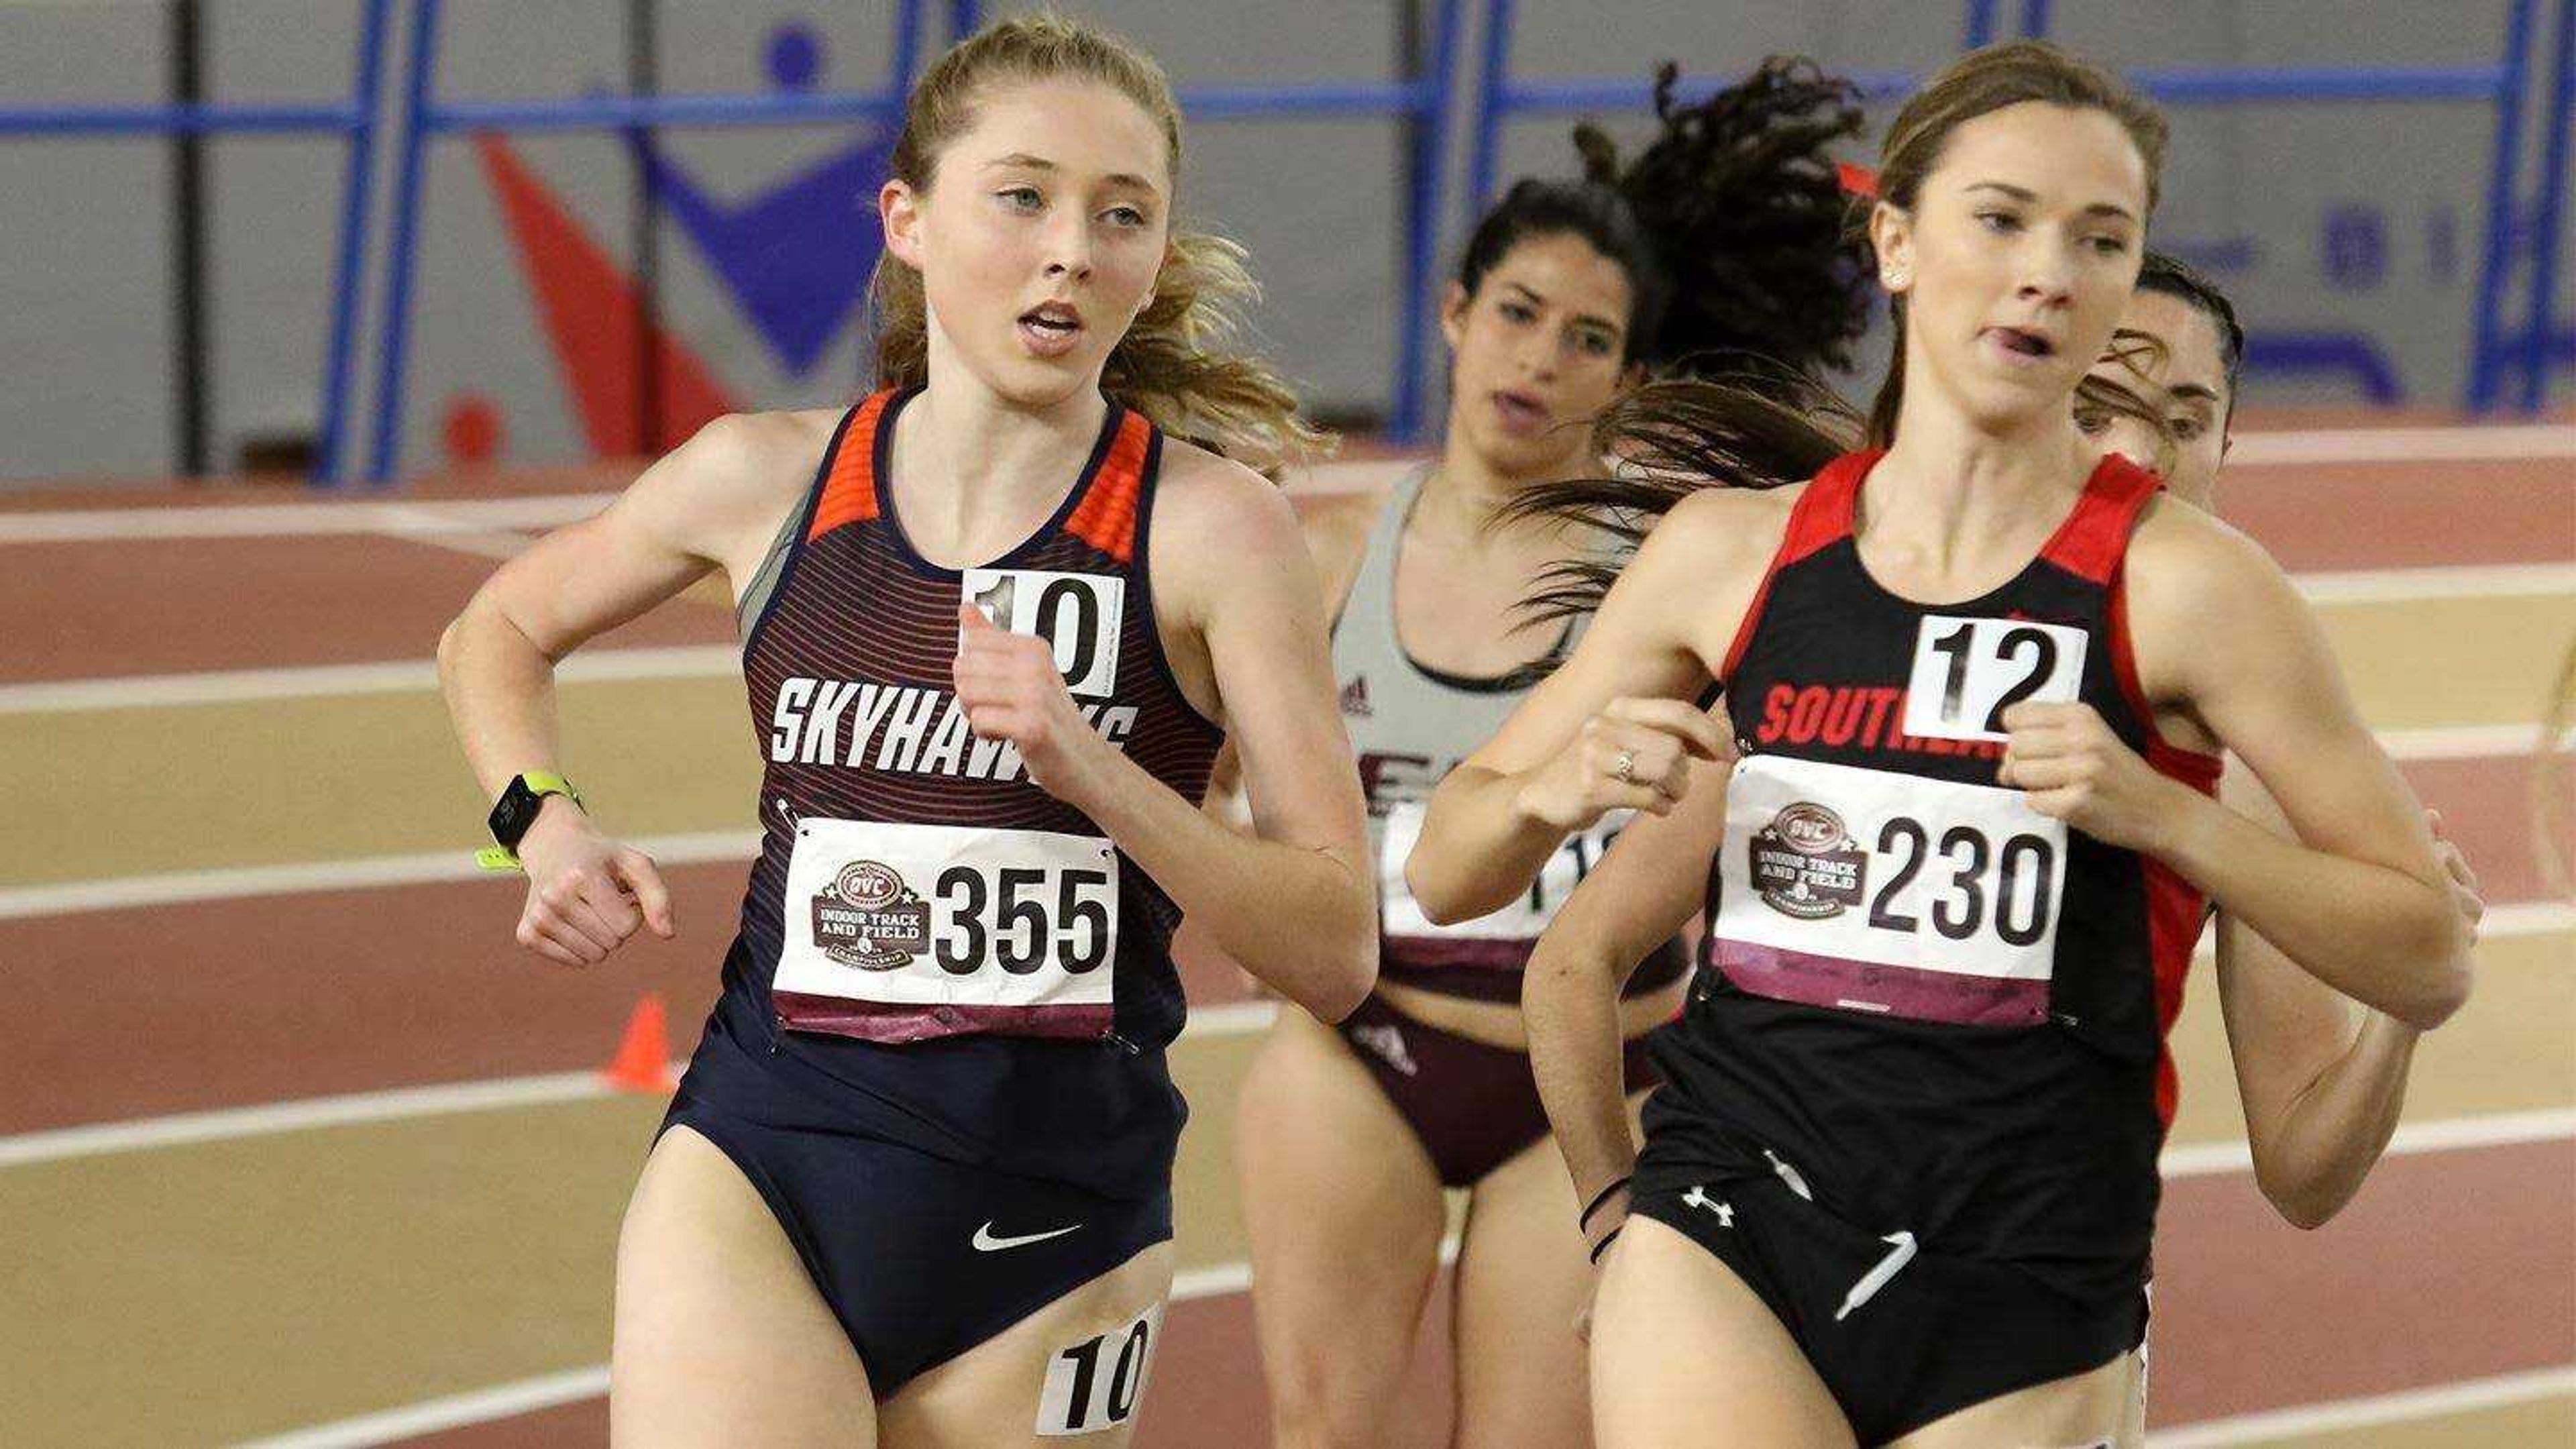 Carli Knott (right) leads the pack as Southeast competes in the Missouri Intercollegiate Meet on Jan. 17 in Columbia, Missouri.